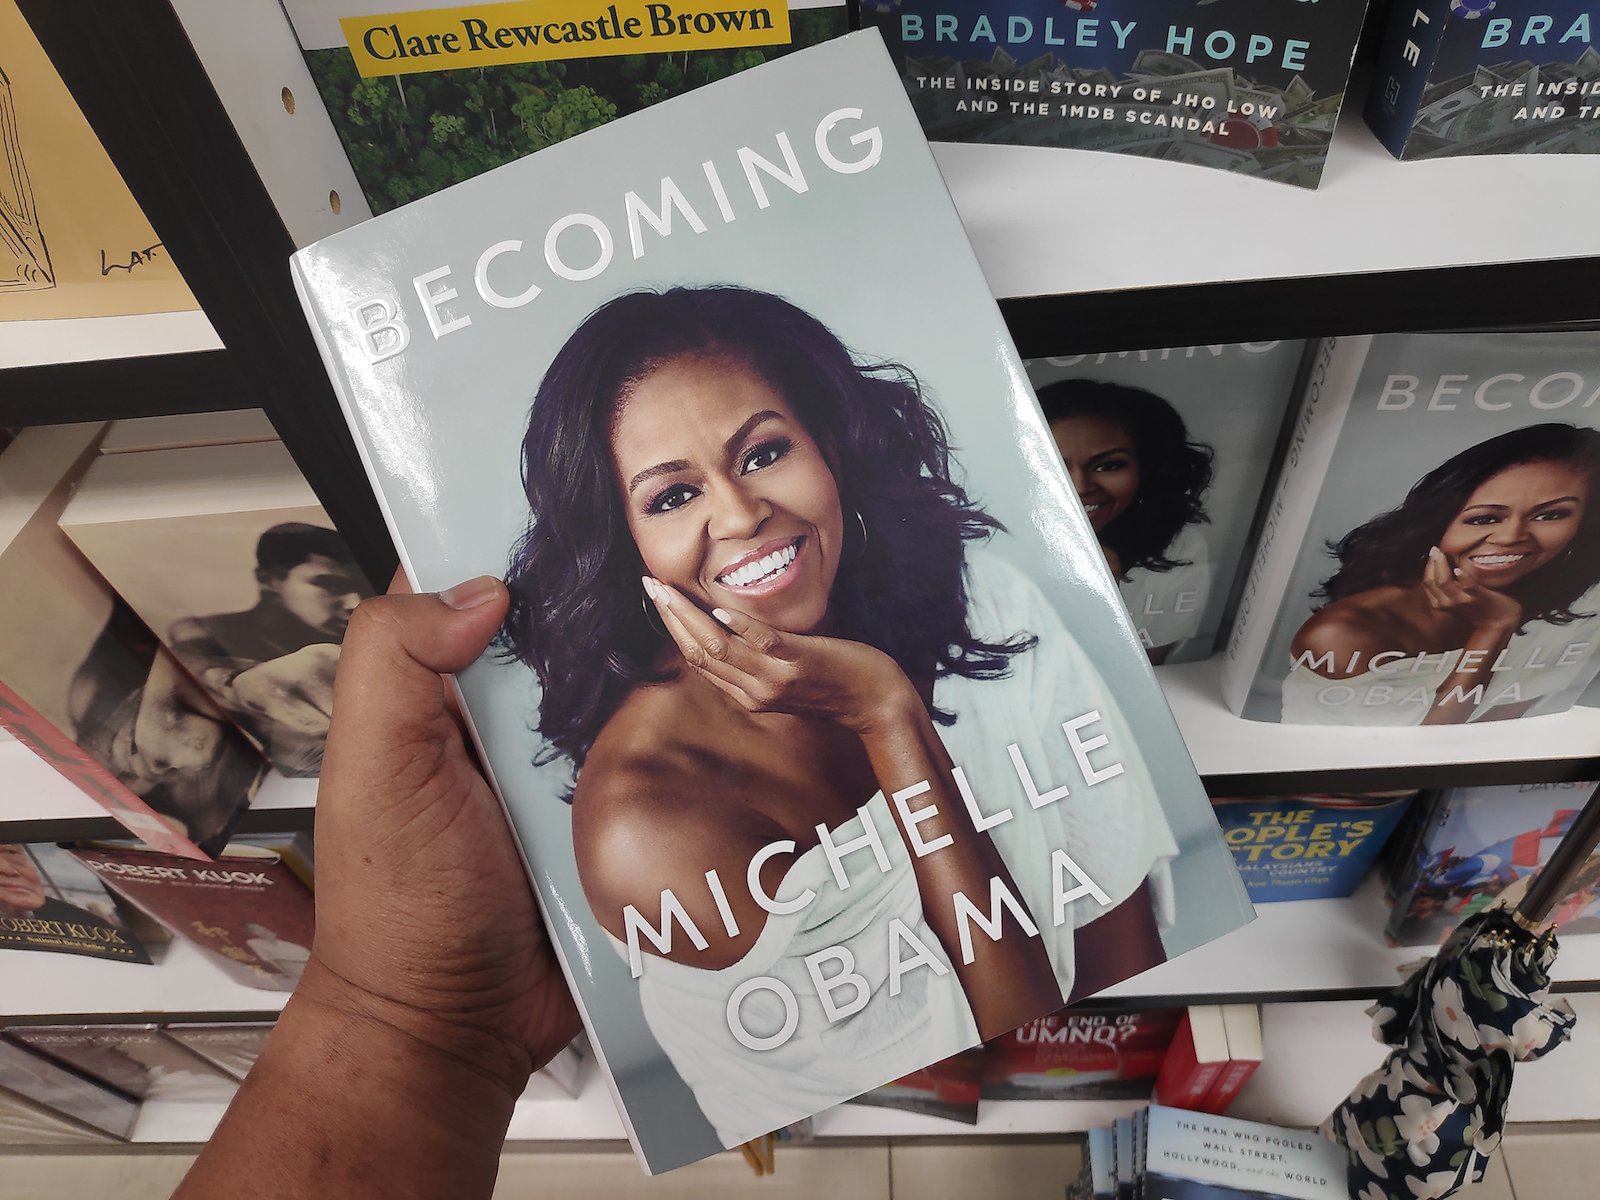 <p>Michelle Obama’s memoir, “<a href="https://global.penguinrandomhouse.com/tag/michelle-obama/" rel="noopener">Becoming</a>,” became an instant bestseller upon its release in 2018. The book provides an intimate look at her life, from her childhood to her time in the White House. It has sold over 10 million copies worldwide and has been translated into several languages. The memoir offers a candid and personal reflection on her journey, struggles, and triumphs, making it a powerful narrative of resilience and hope.</p>